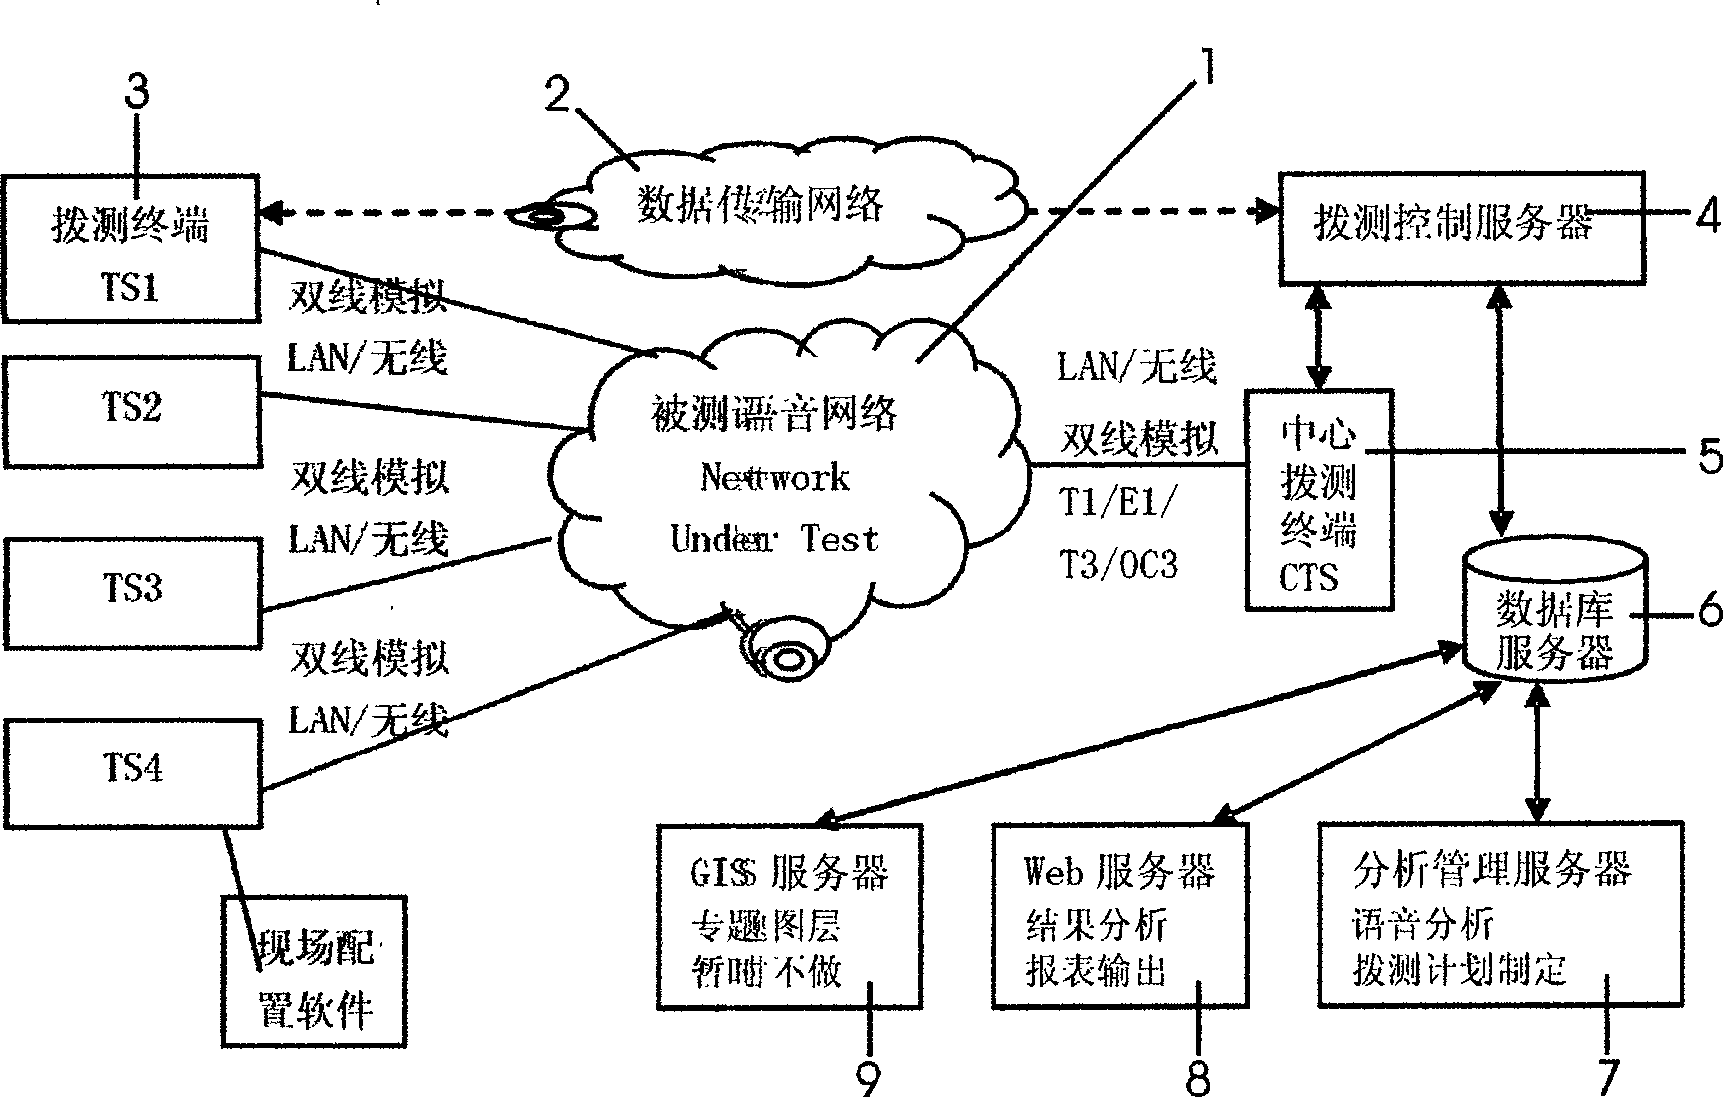 Speech quality evaluation system of mobile communication network